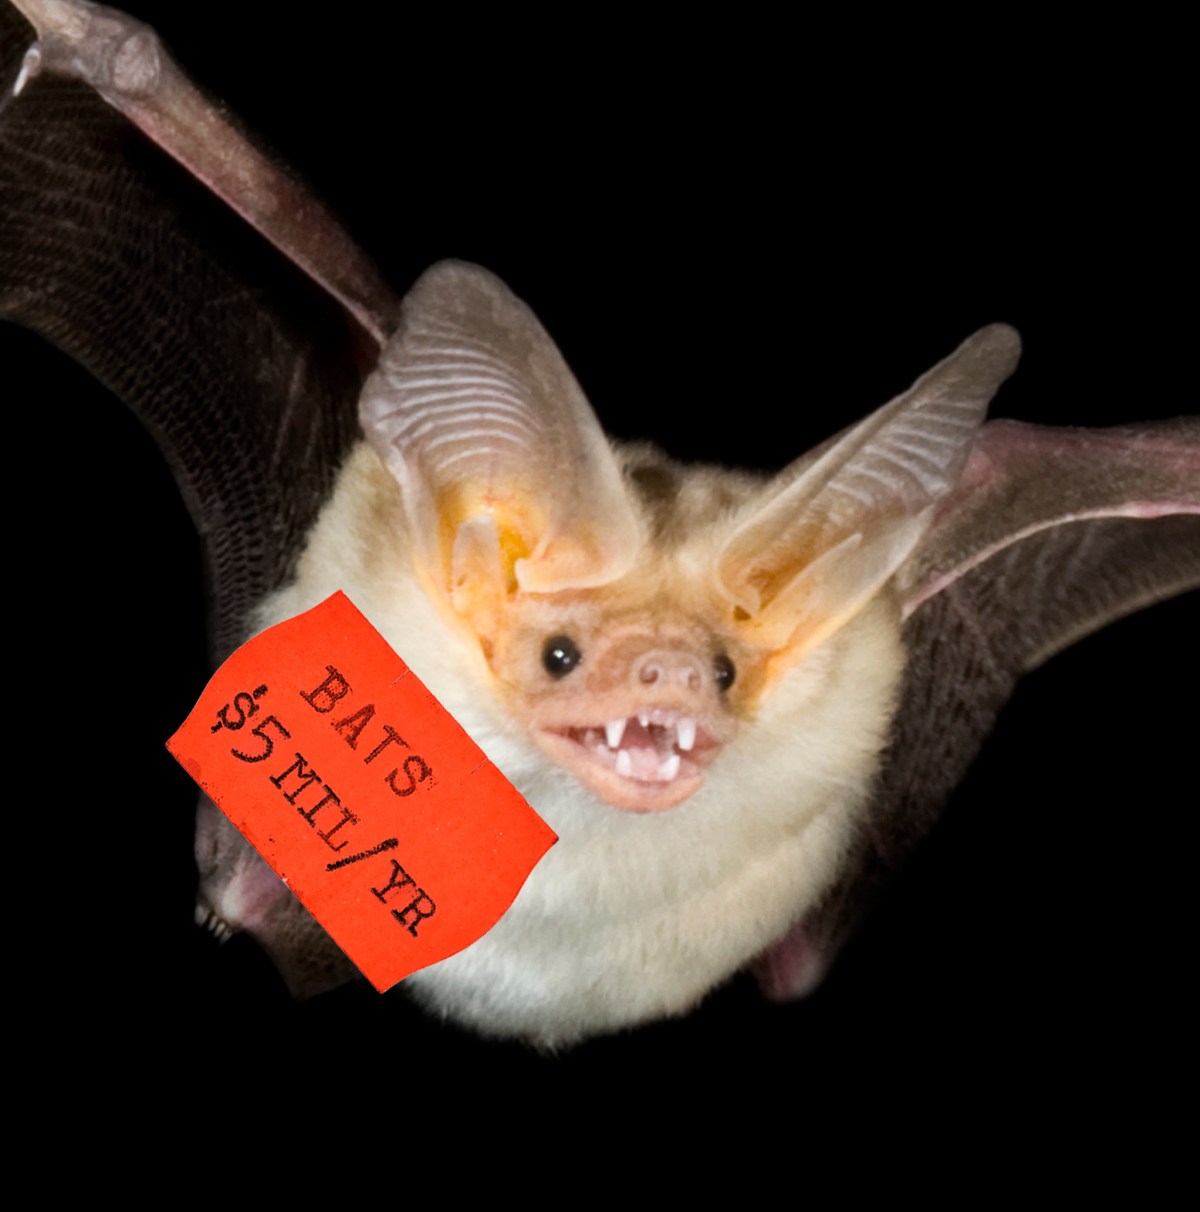 What’s a wild bat worth to you? This economist is asking.